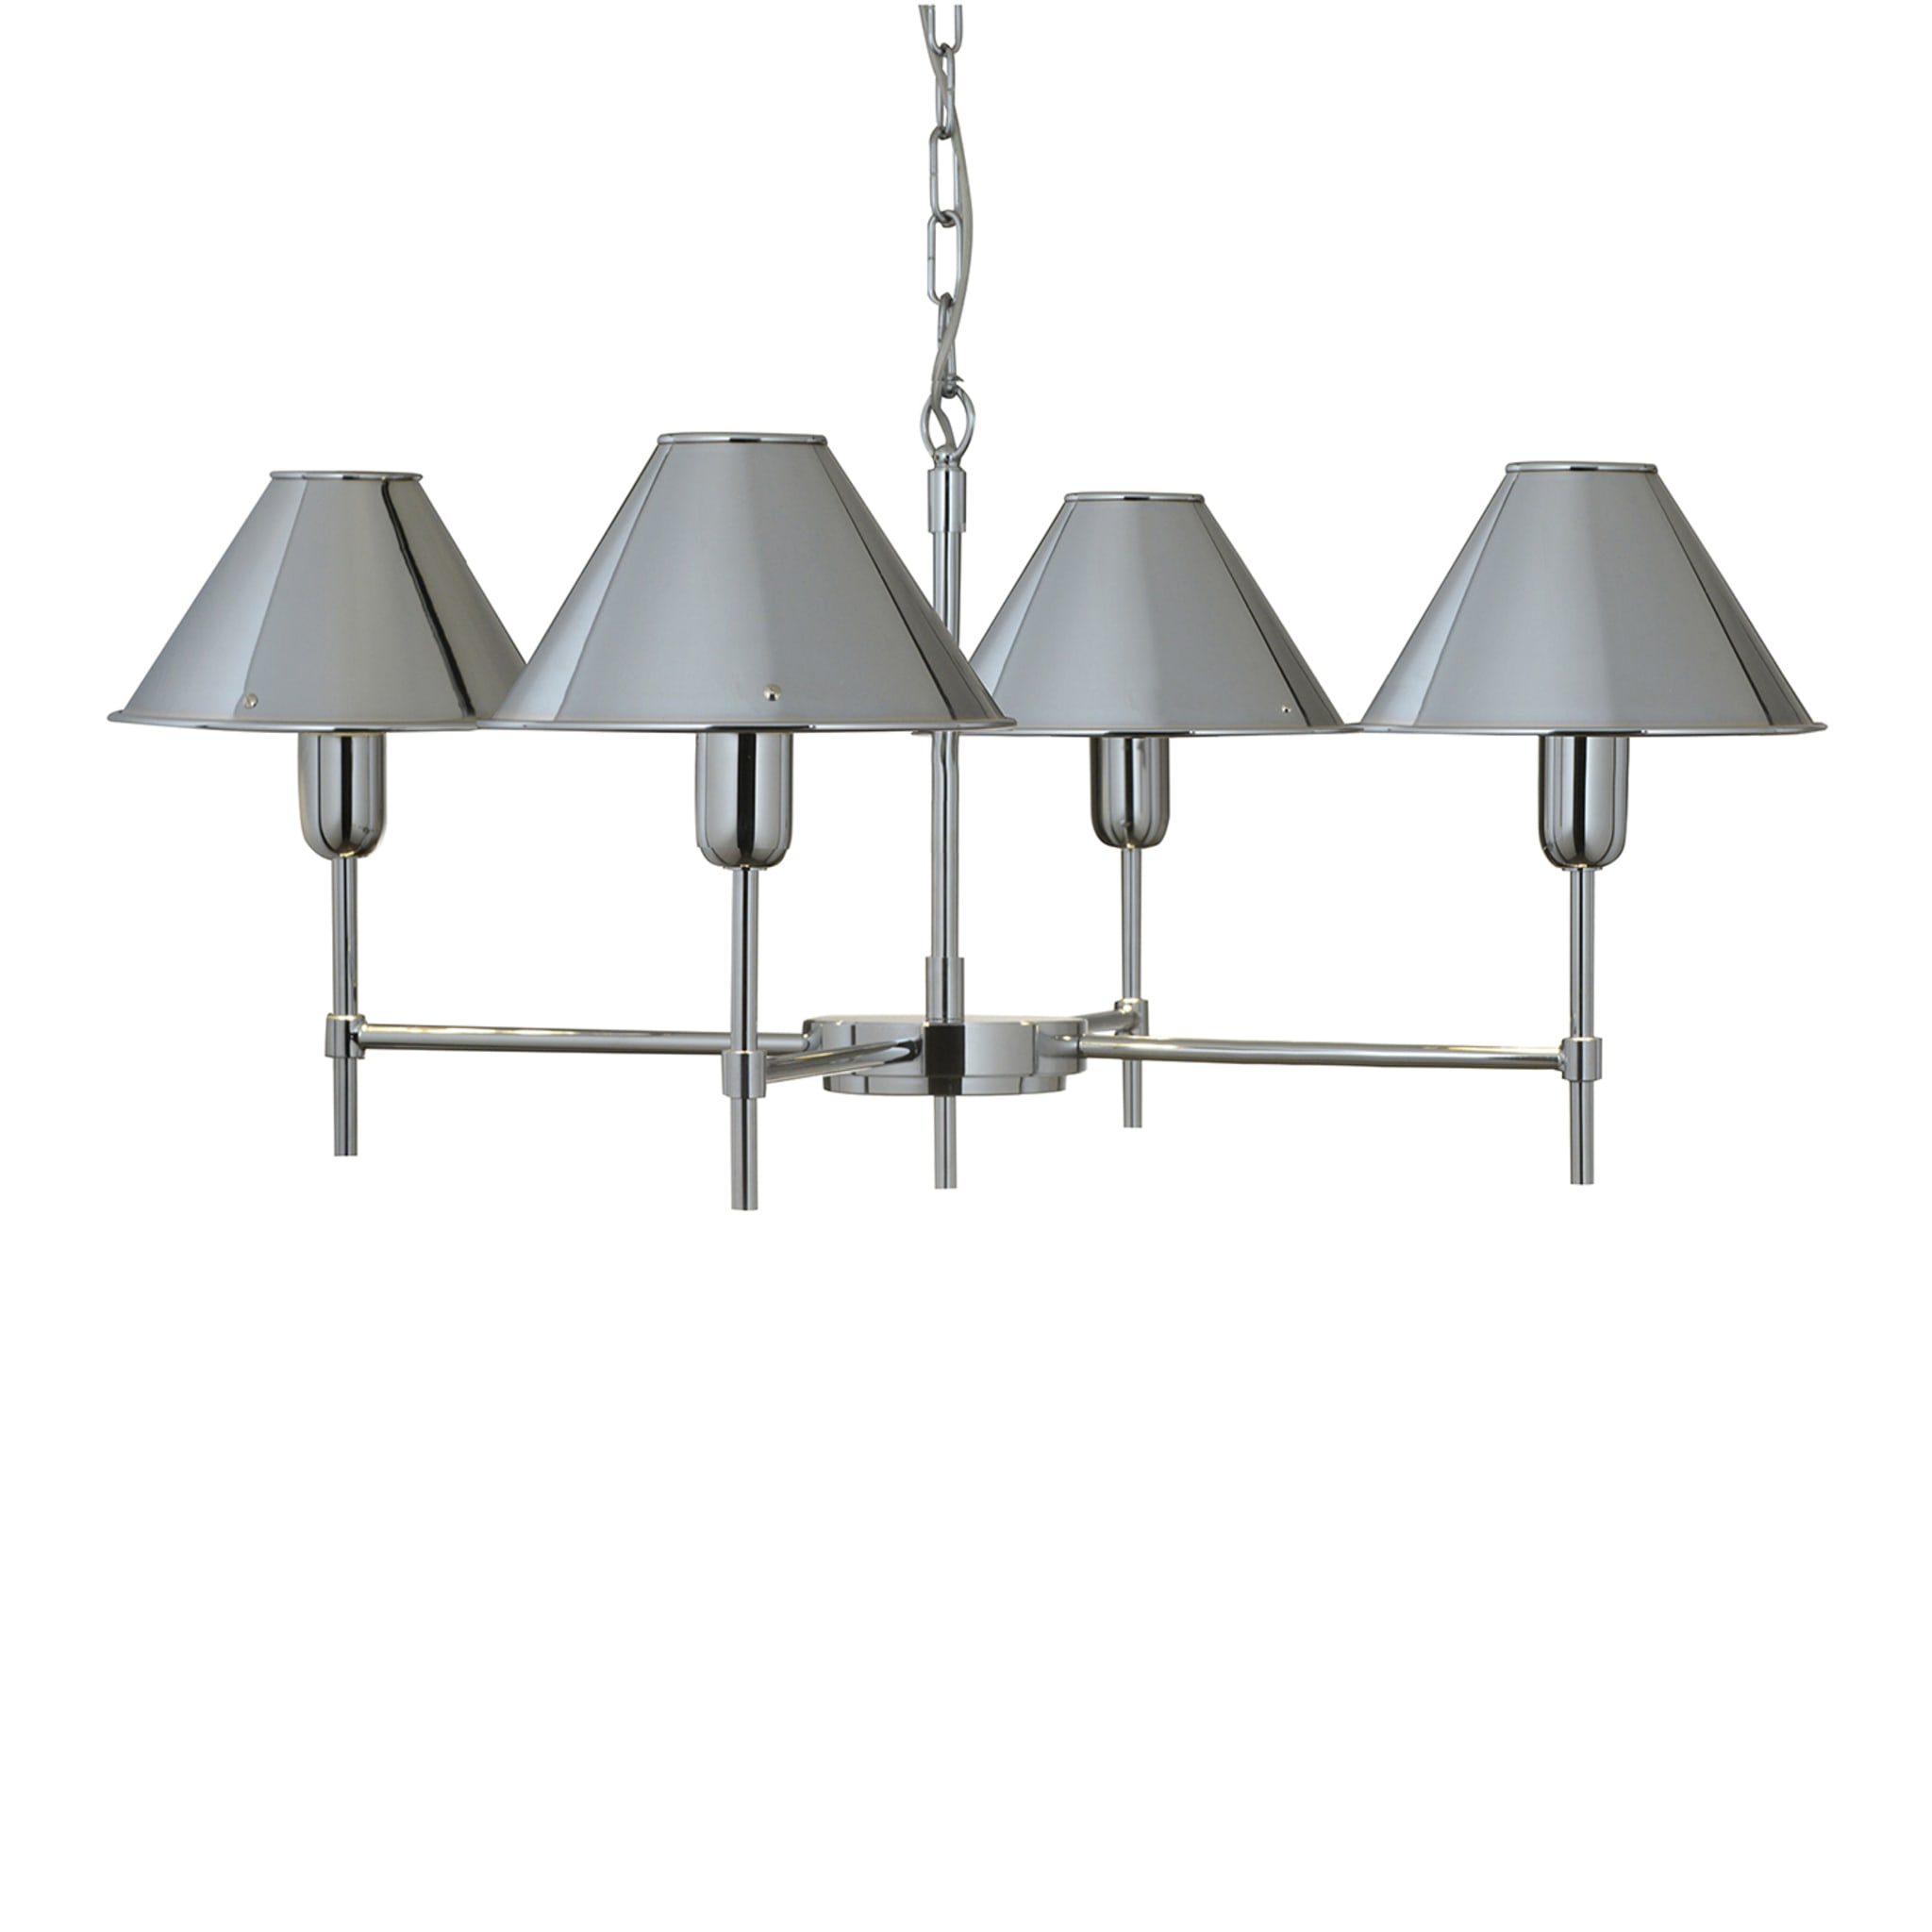 Alicya M287 Chandelier by Stefano Tabarin - Main view